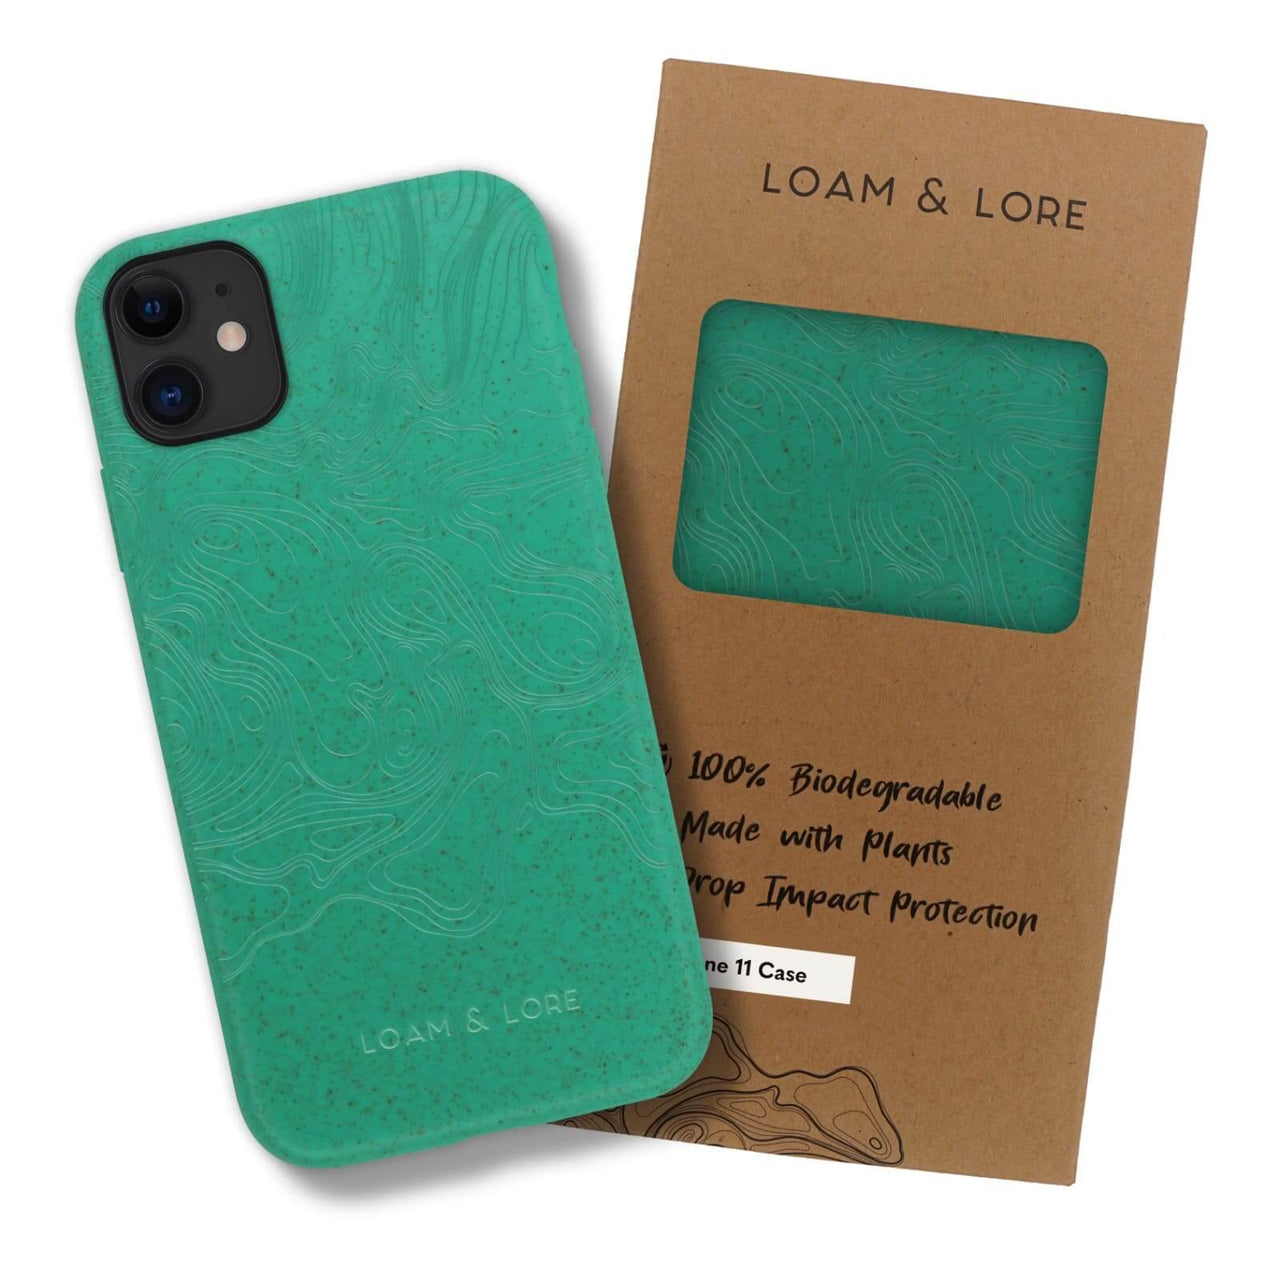 Eco Friendly iPhone 11 Case Compostable & Biodegradable - Loam & Lore